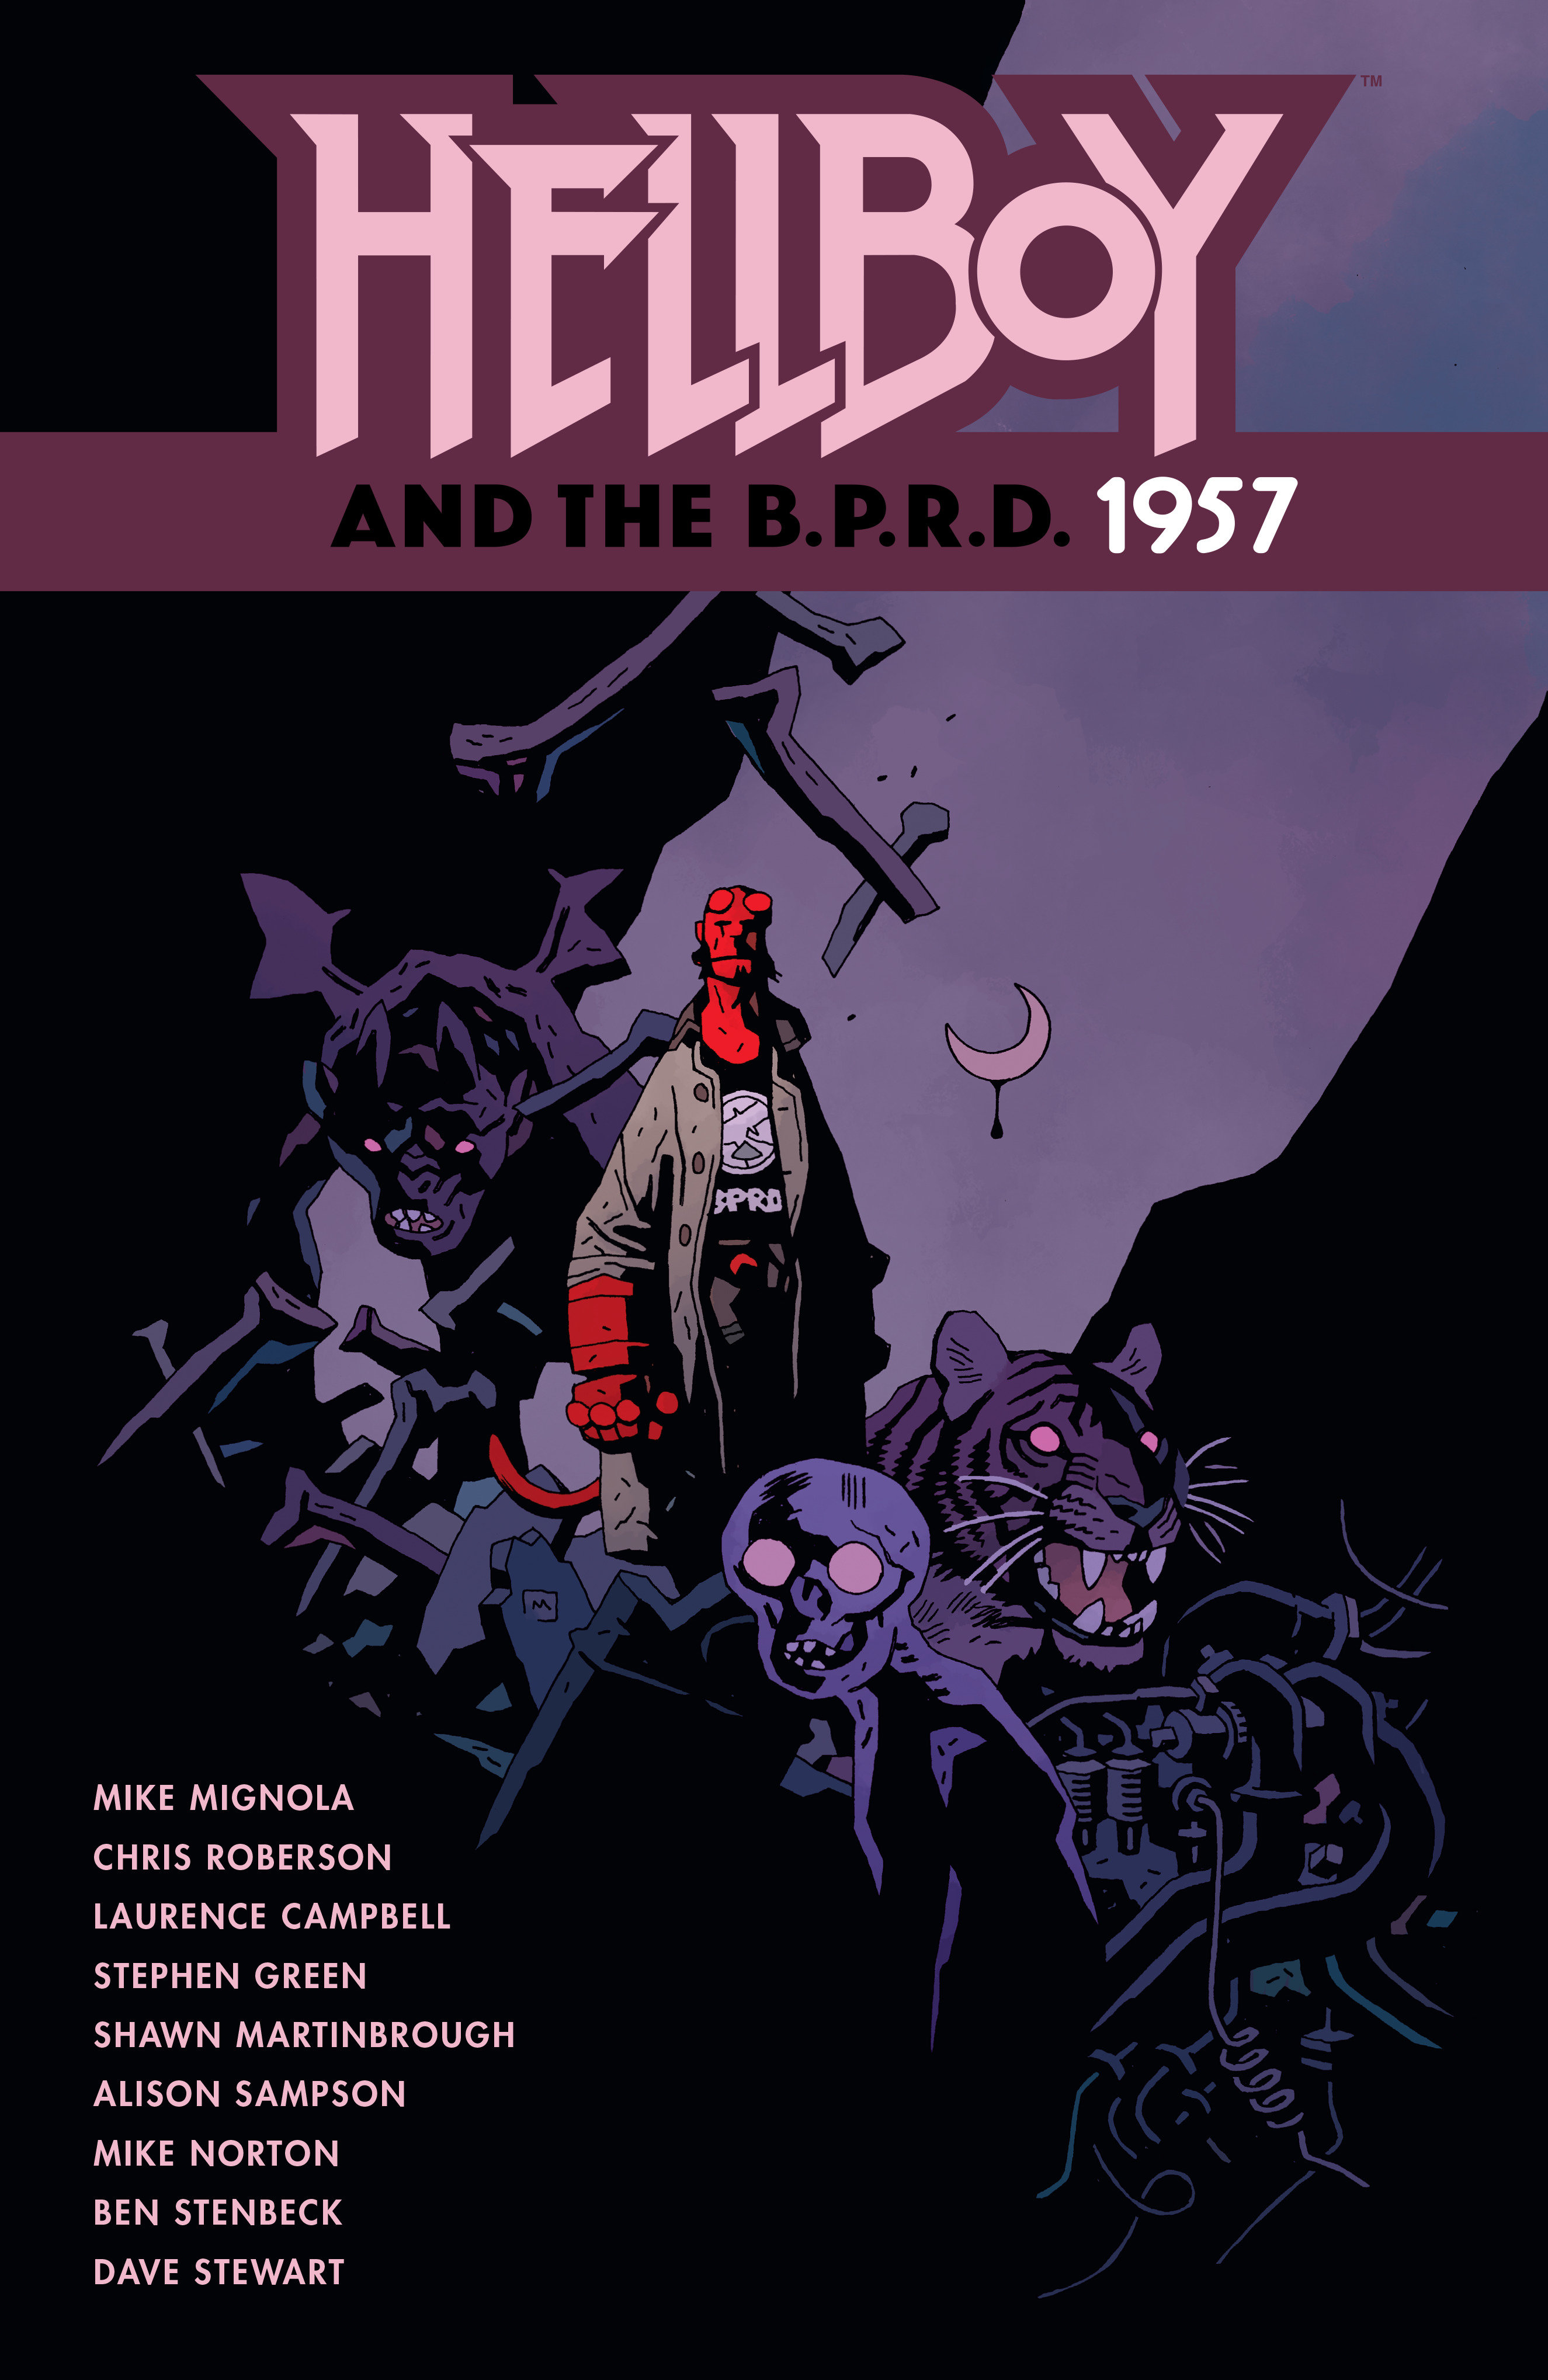 Hellboy And B.P.R.D. 1957 Graphic Novel